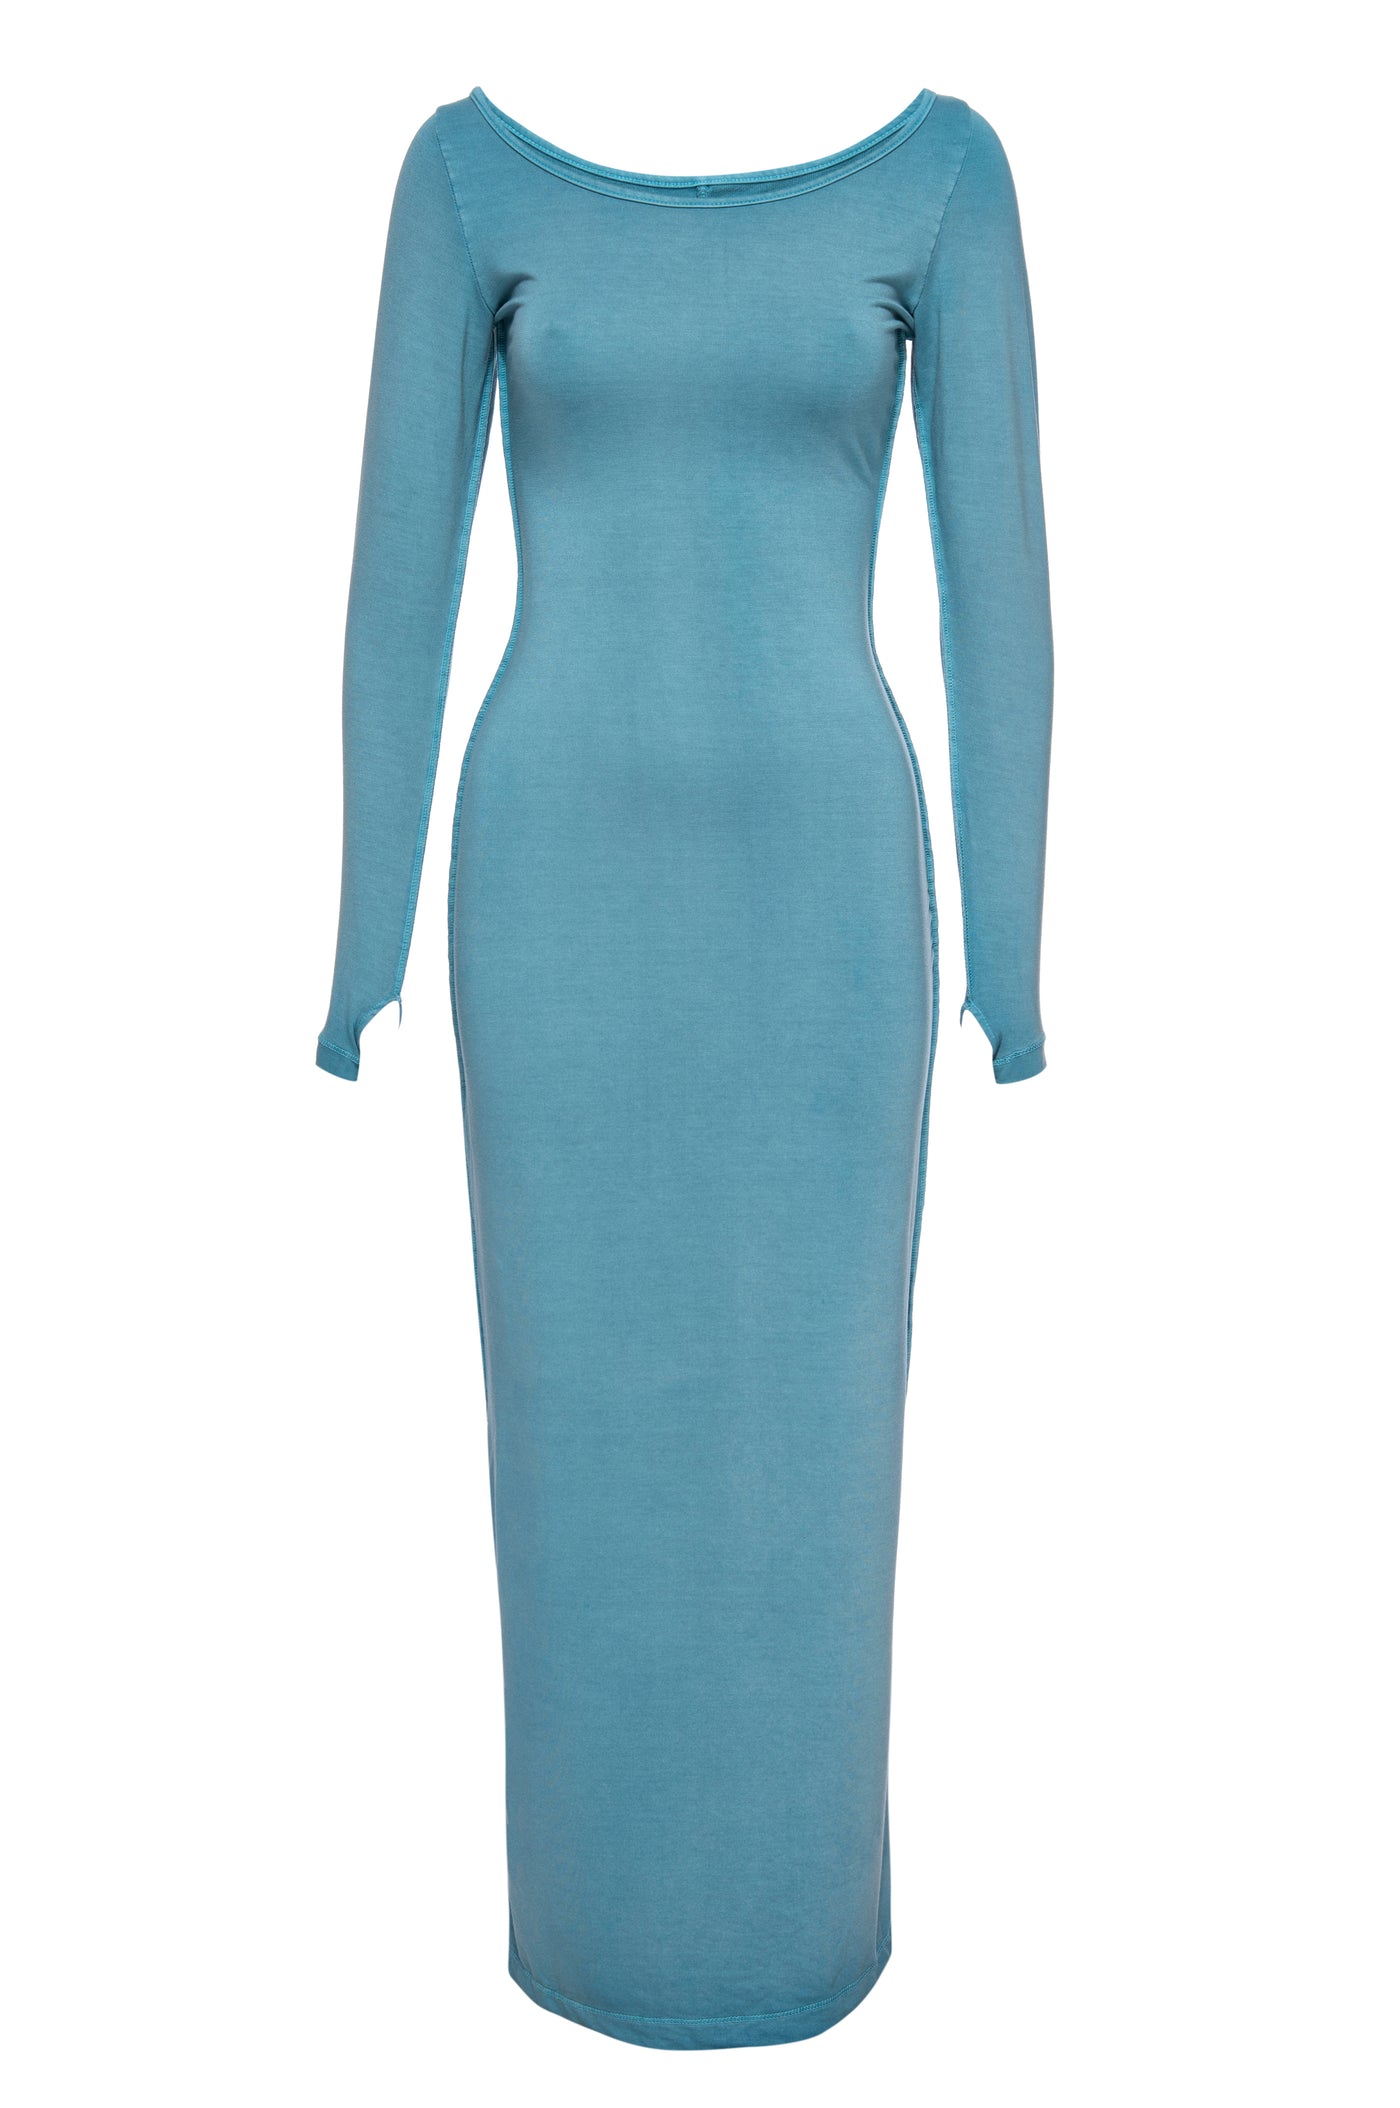 Washed Jade Lonnie Dress shown, featuring a soft, hand-dyed texture and snug, supportive fabric.